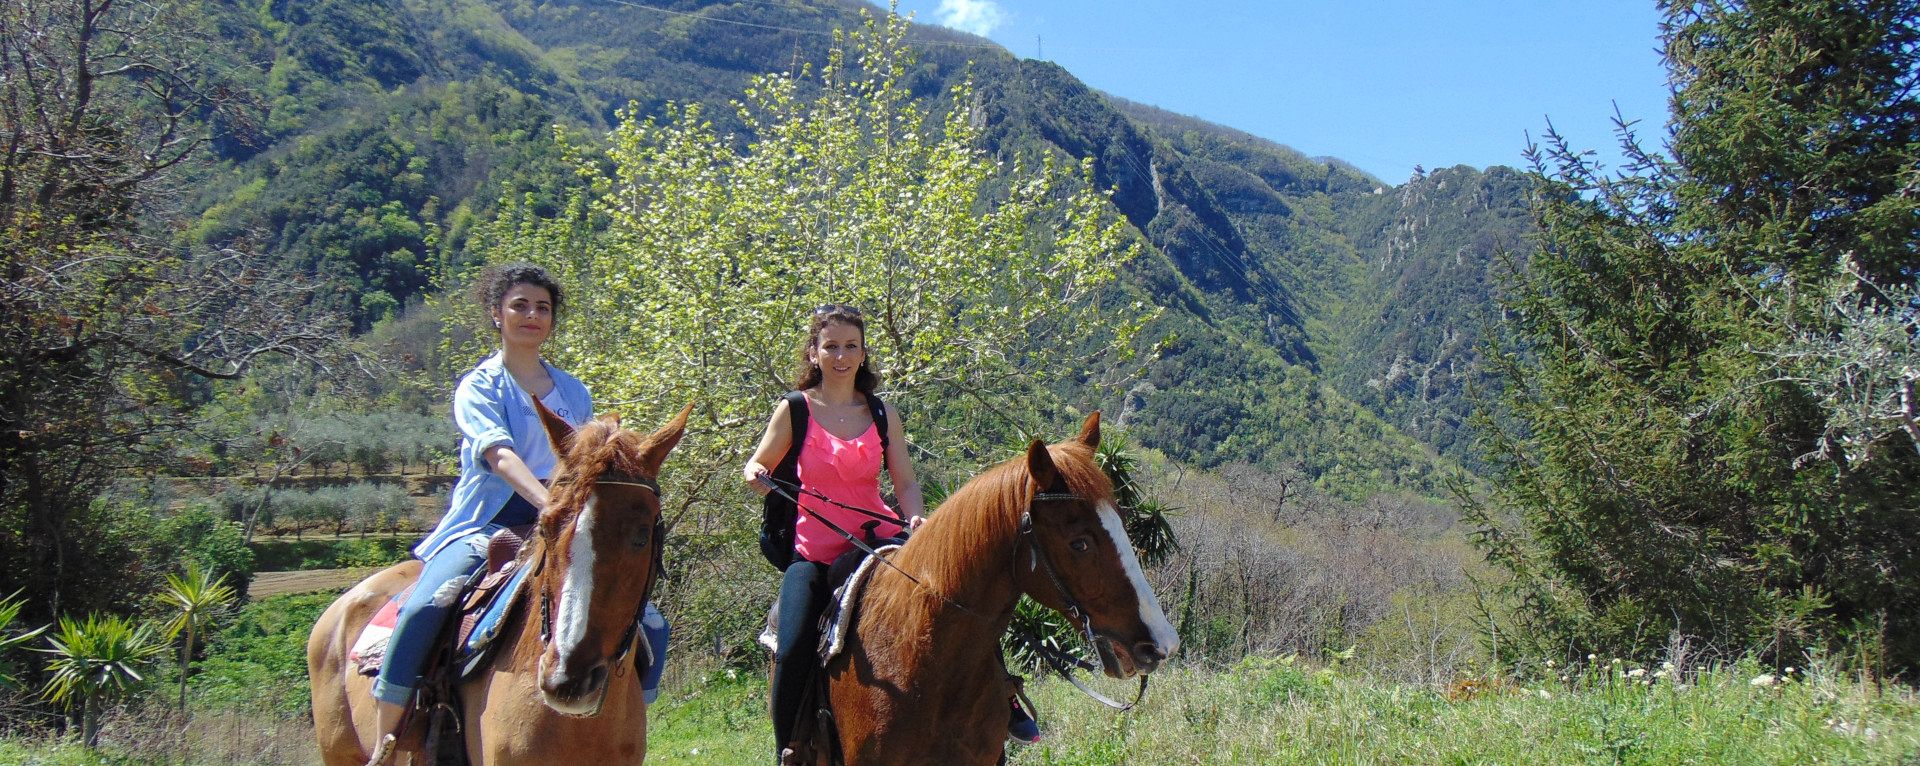 Two girls riding a horse in the Vesuvius National Park